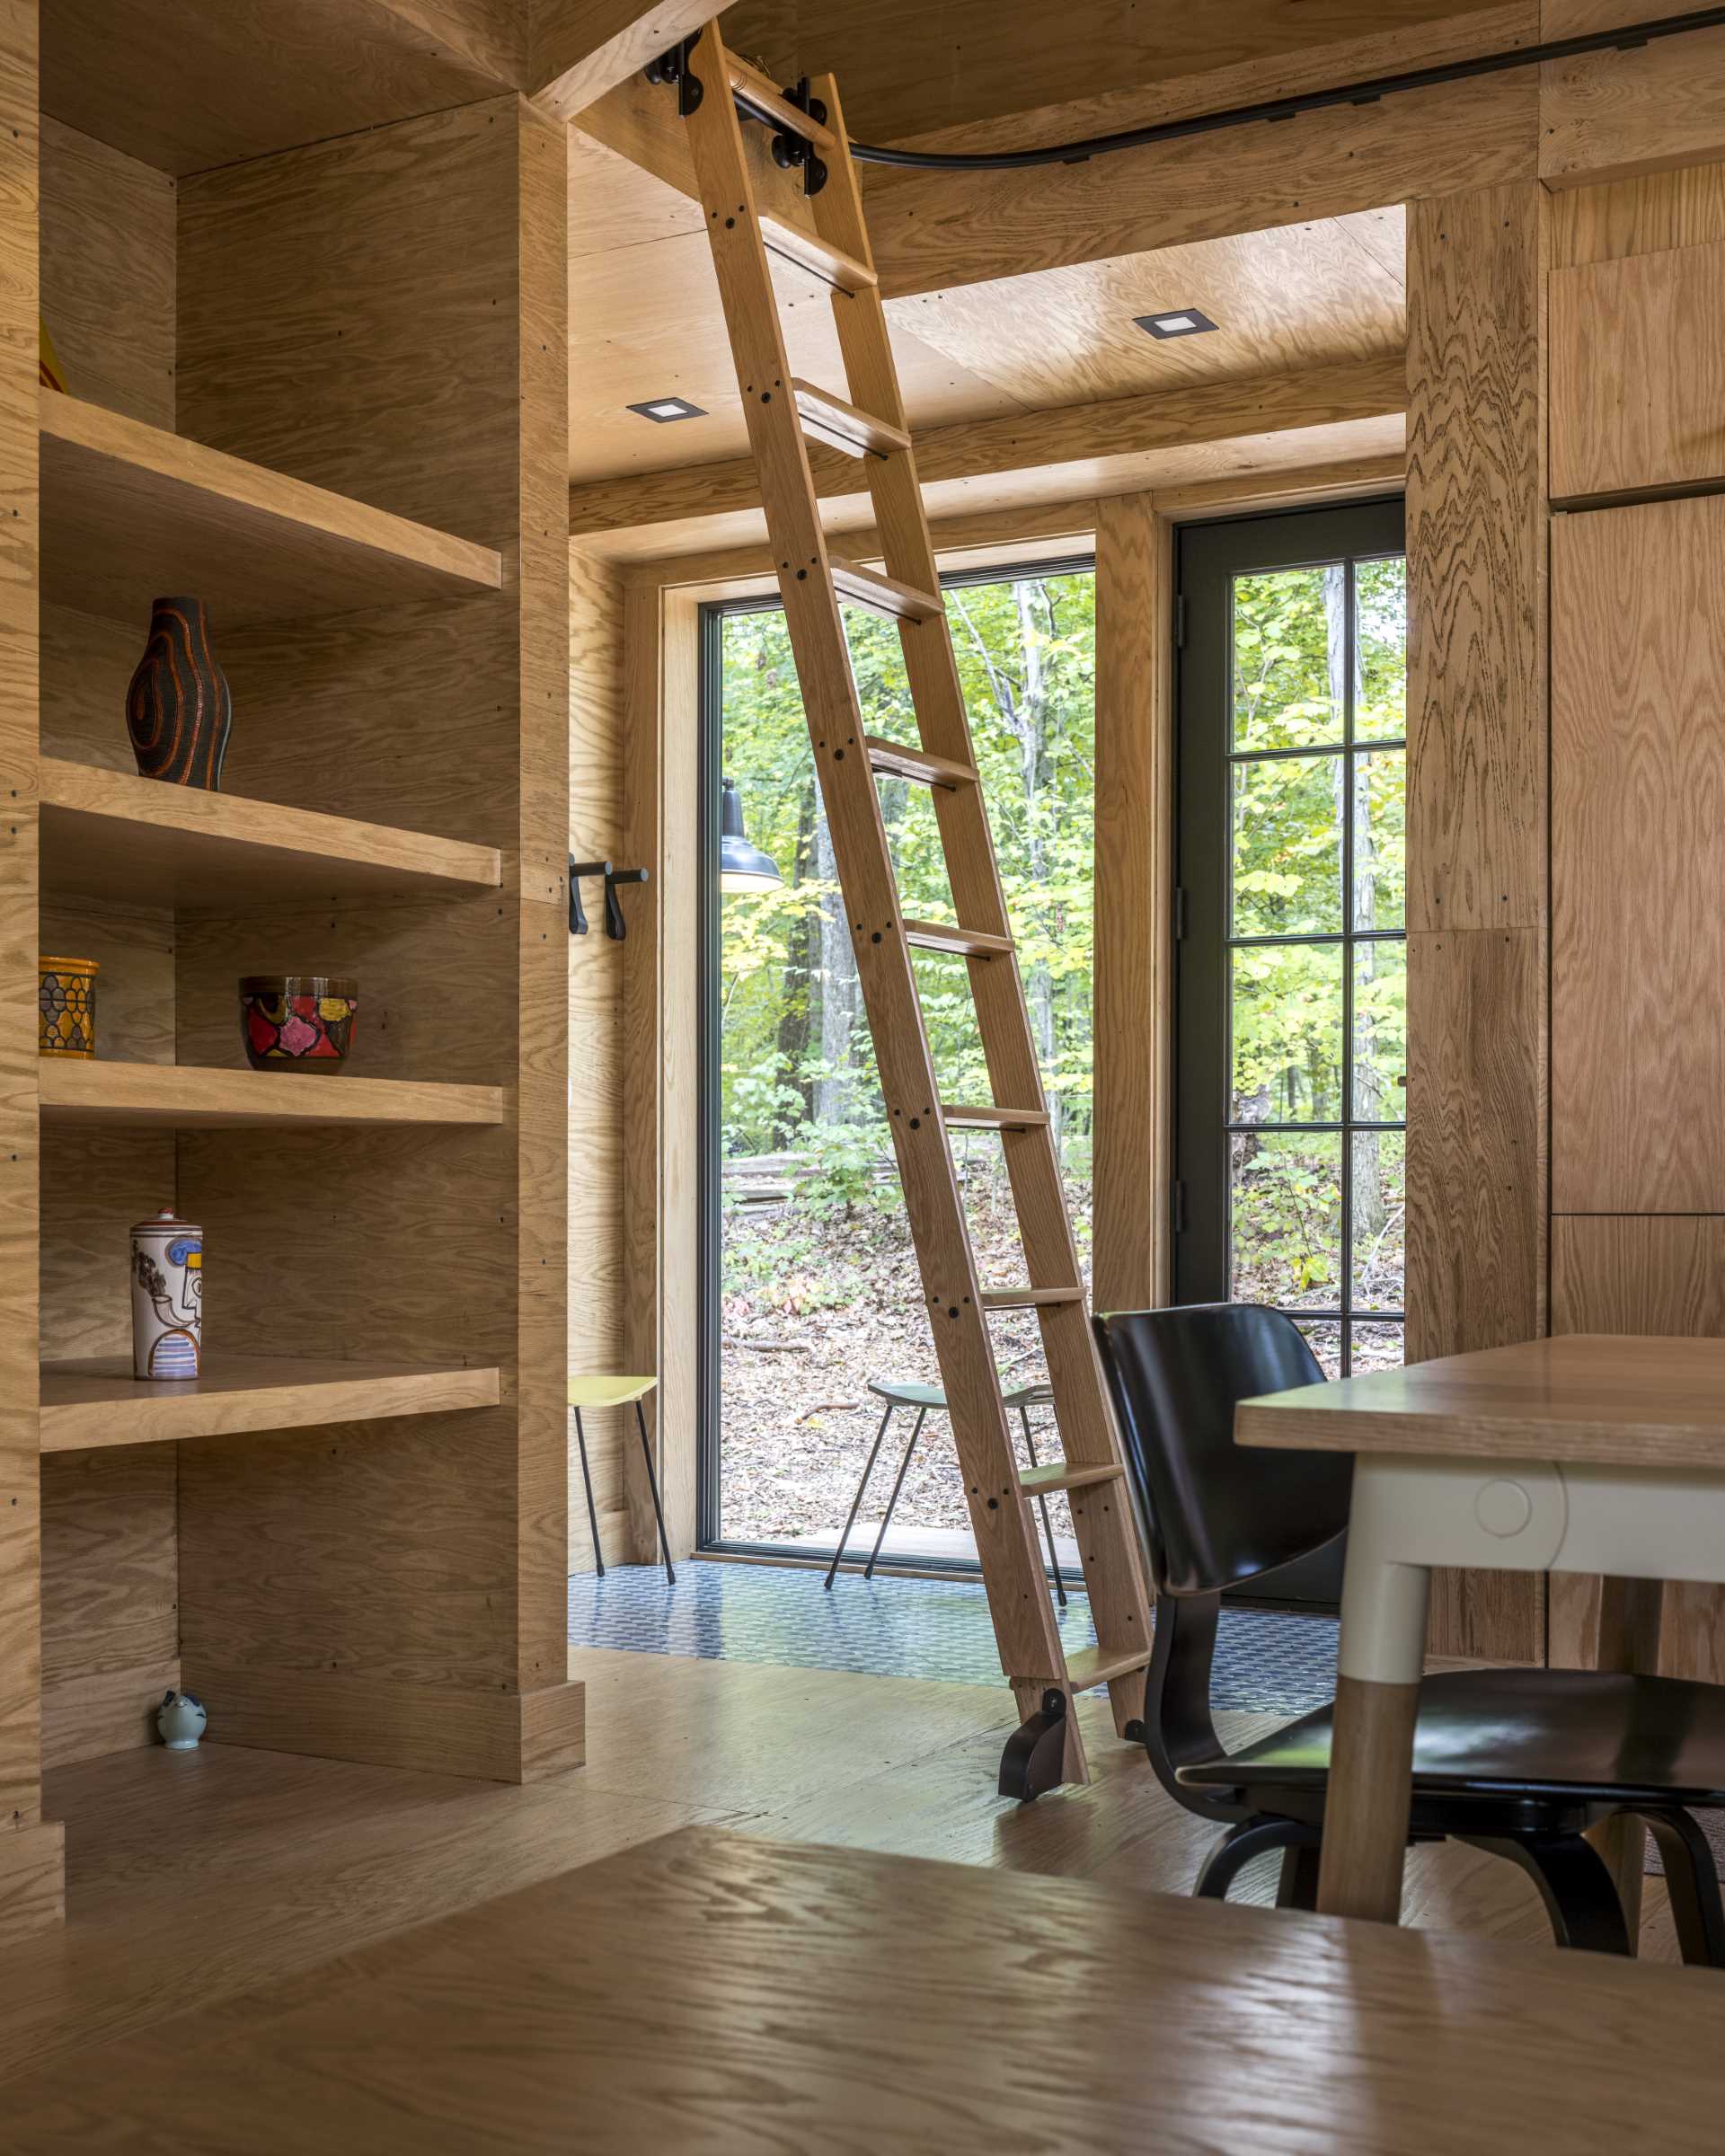 A modern cabin with a ladders that provides access to the upper shelves and loft area.